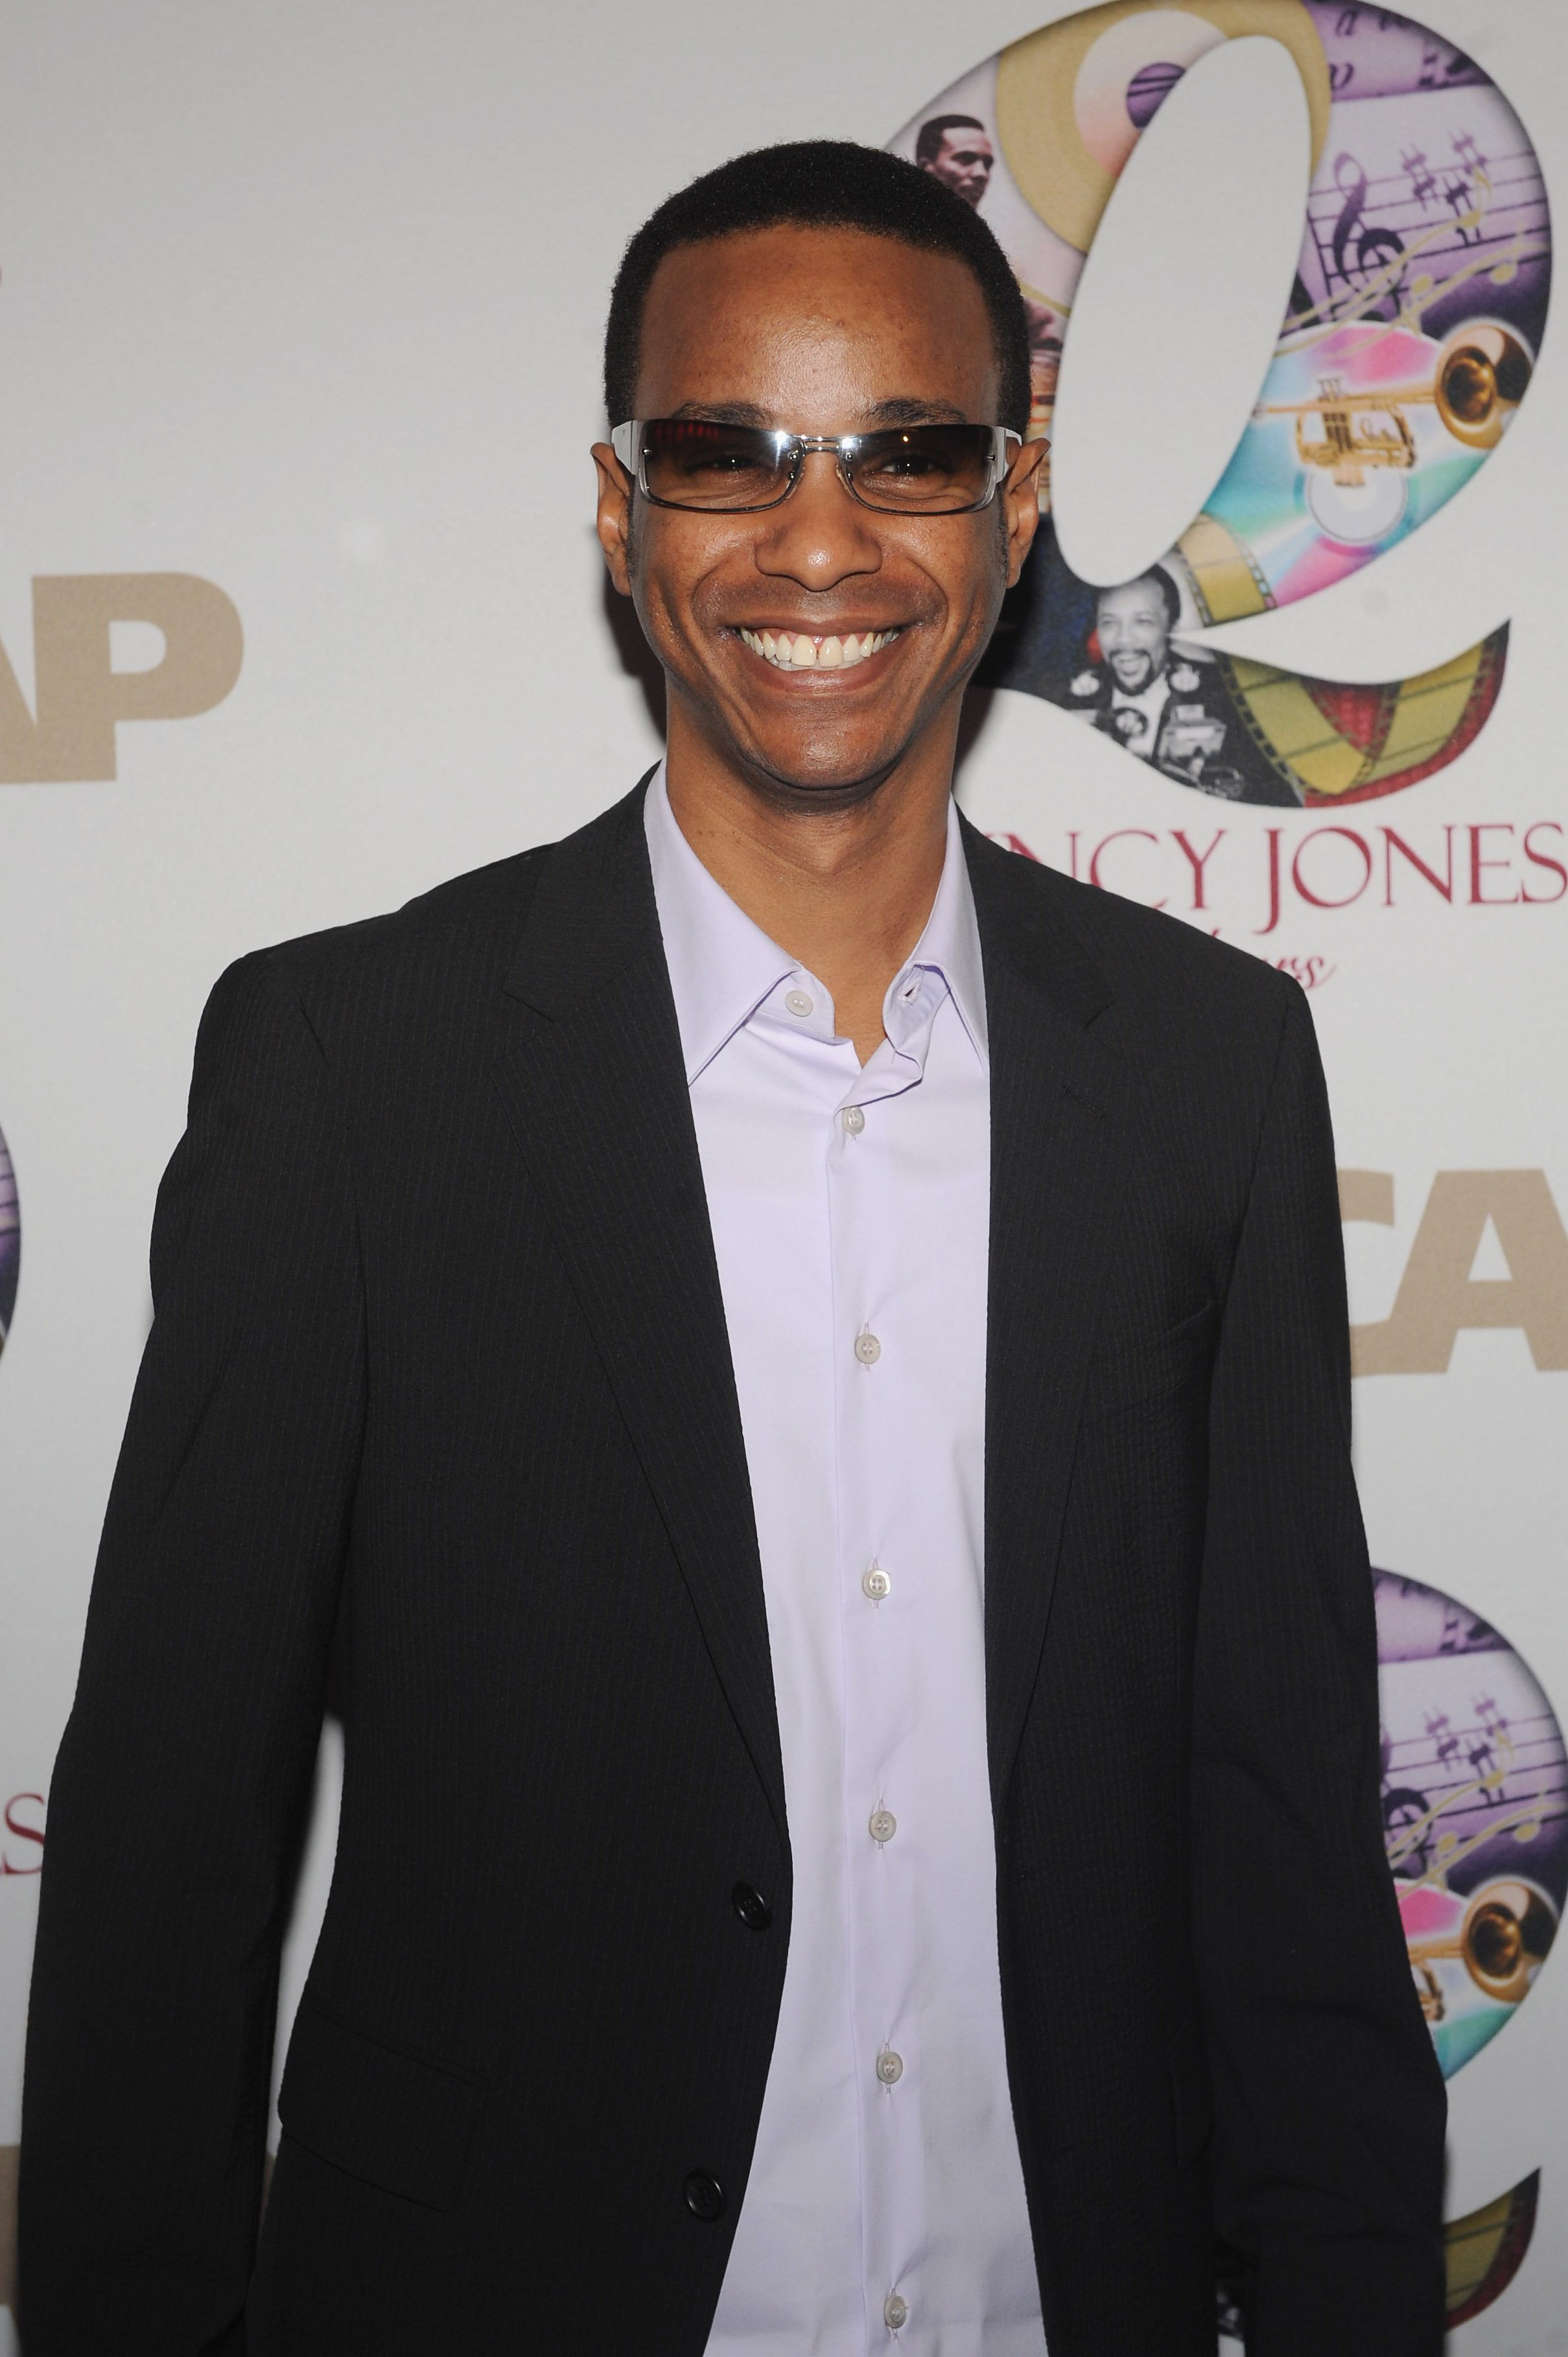  Tevin Campbell attends the ASCAP Pied Piper award celebration in honor of Quincy Jones, 2008. | Photo: GettyImages